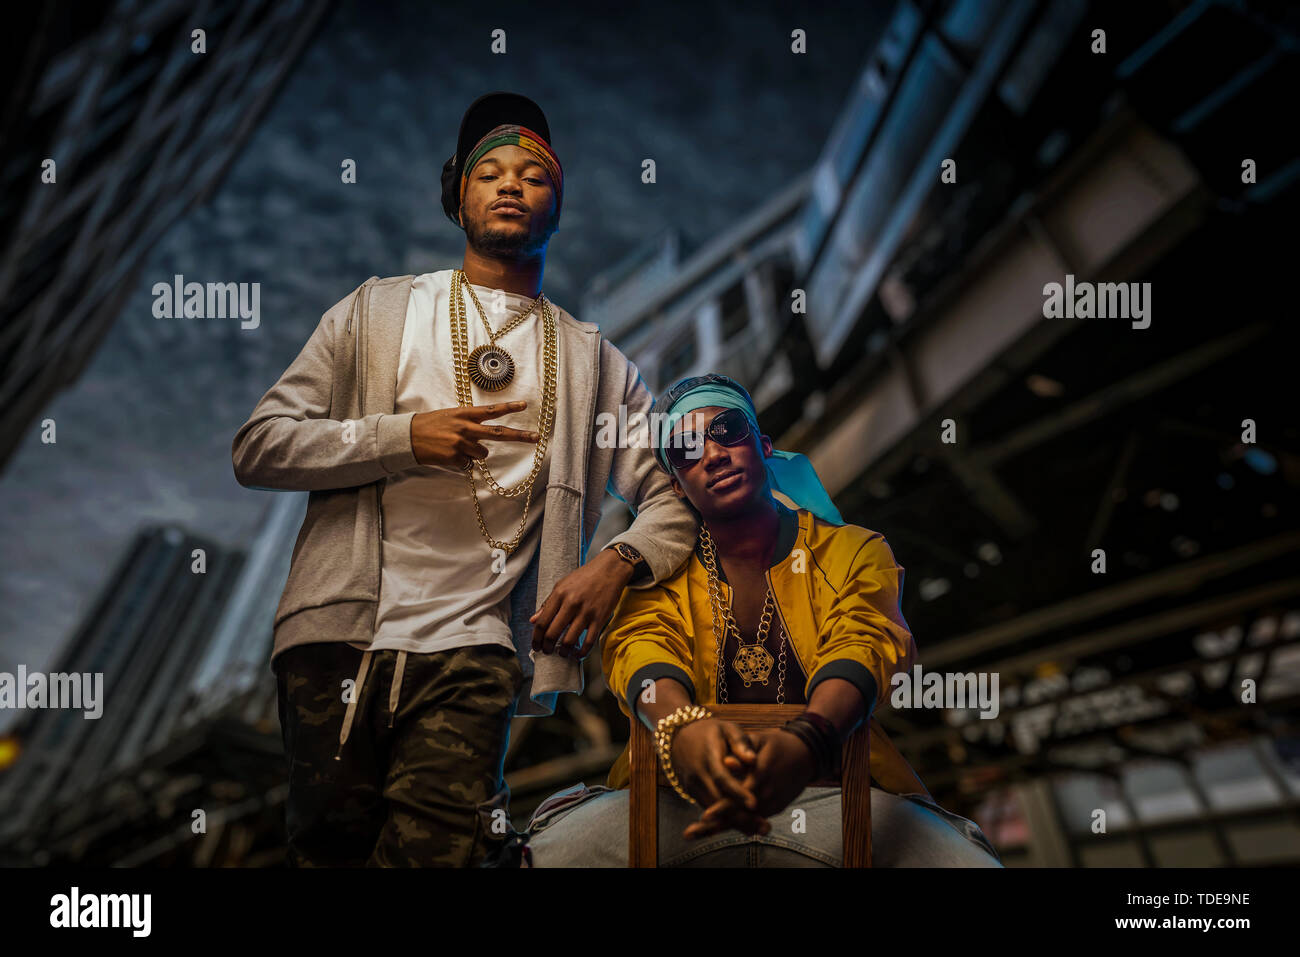 Two black rappers poses on night city street Stock Photo